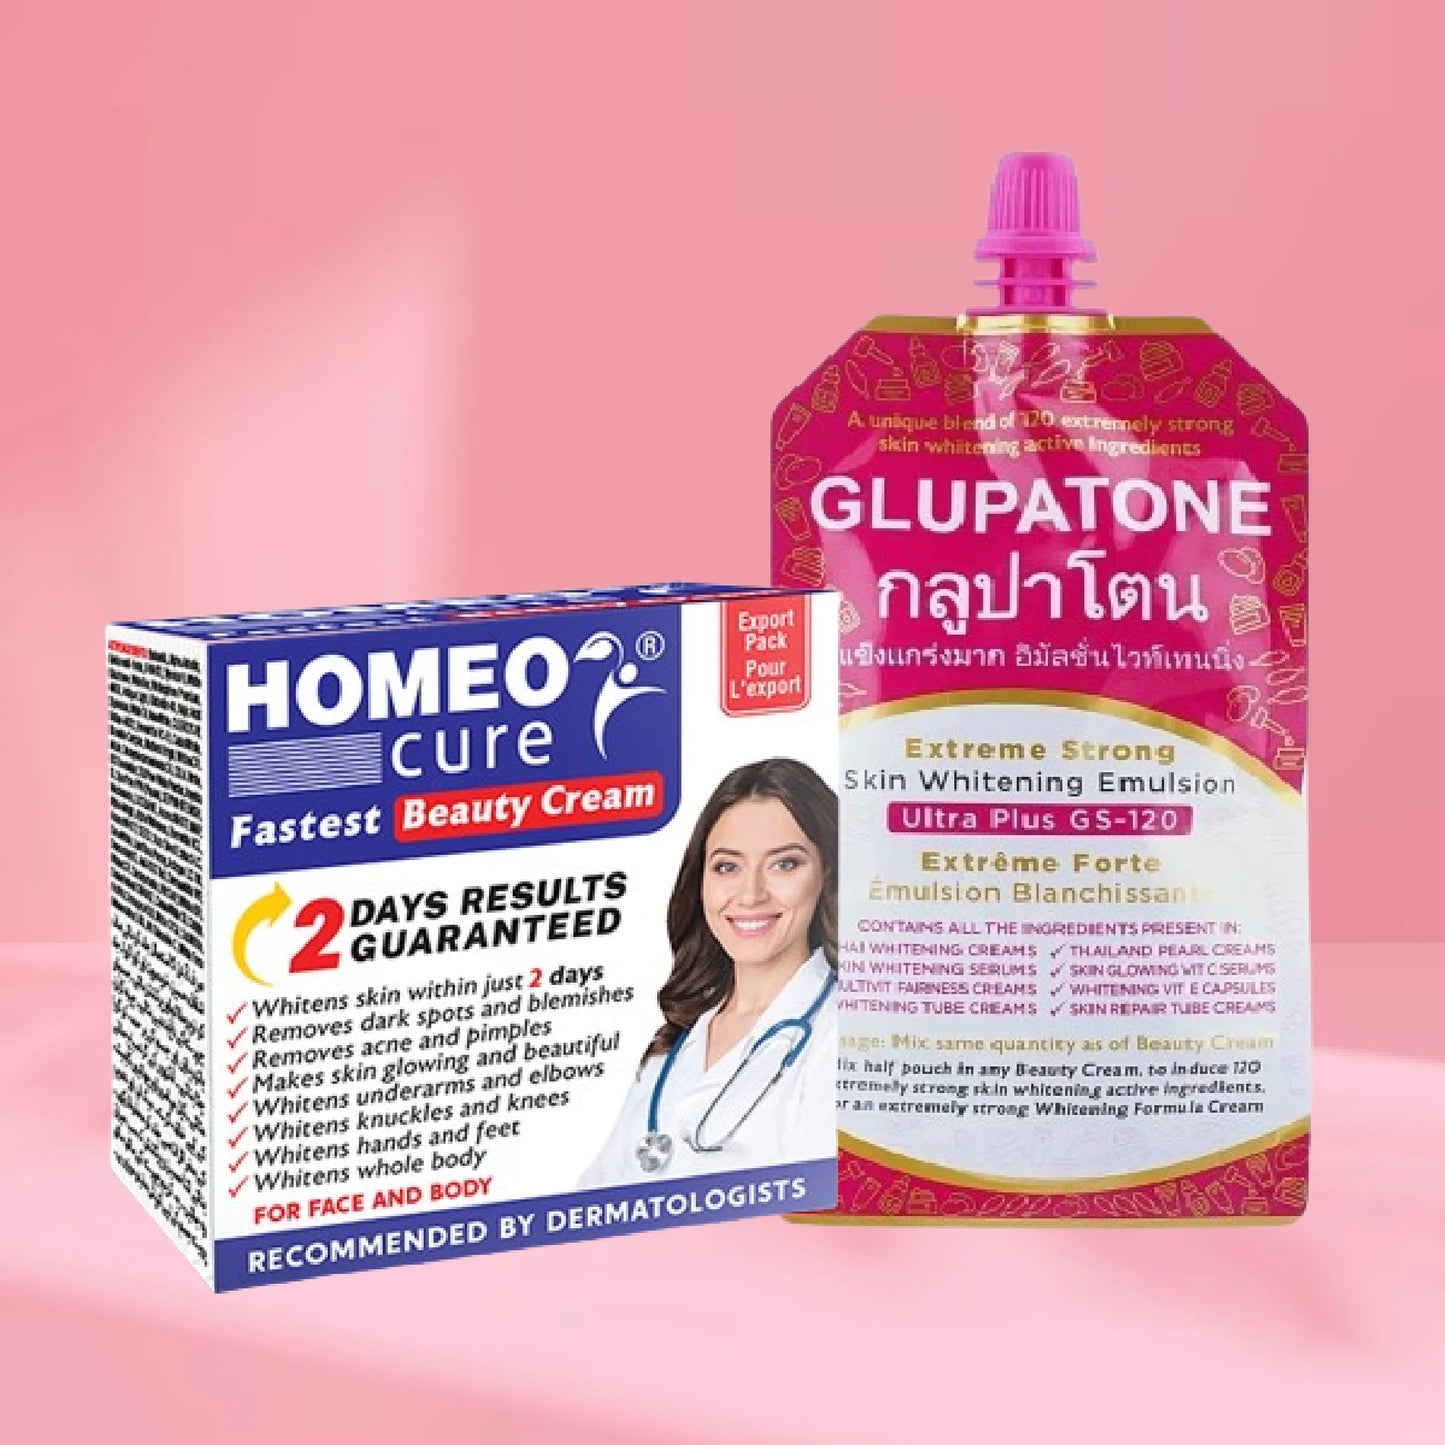 THE HOMEO CURE GLUPATONE PACK OF HOMEO CURE WITH ORIGNAL BARCODE